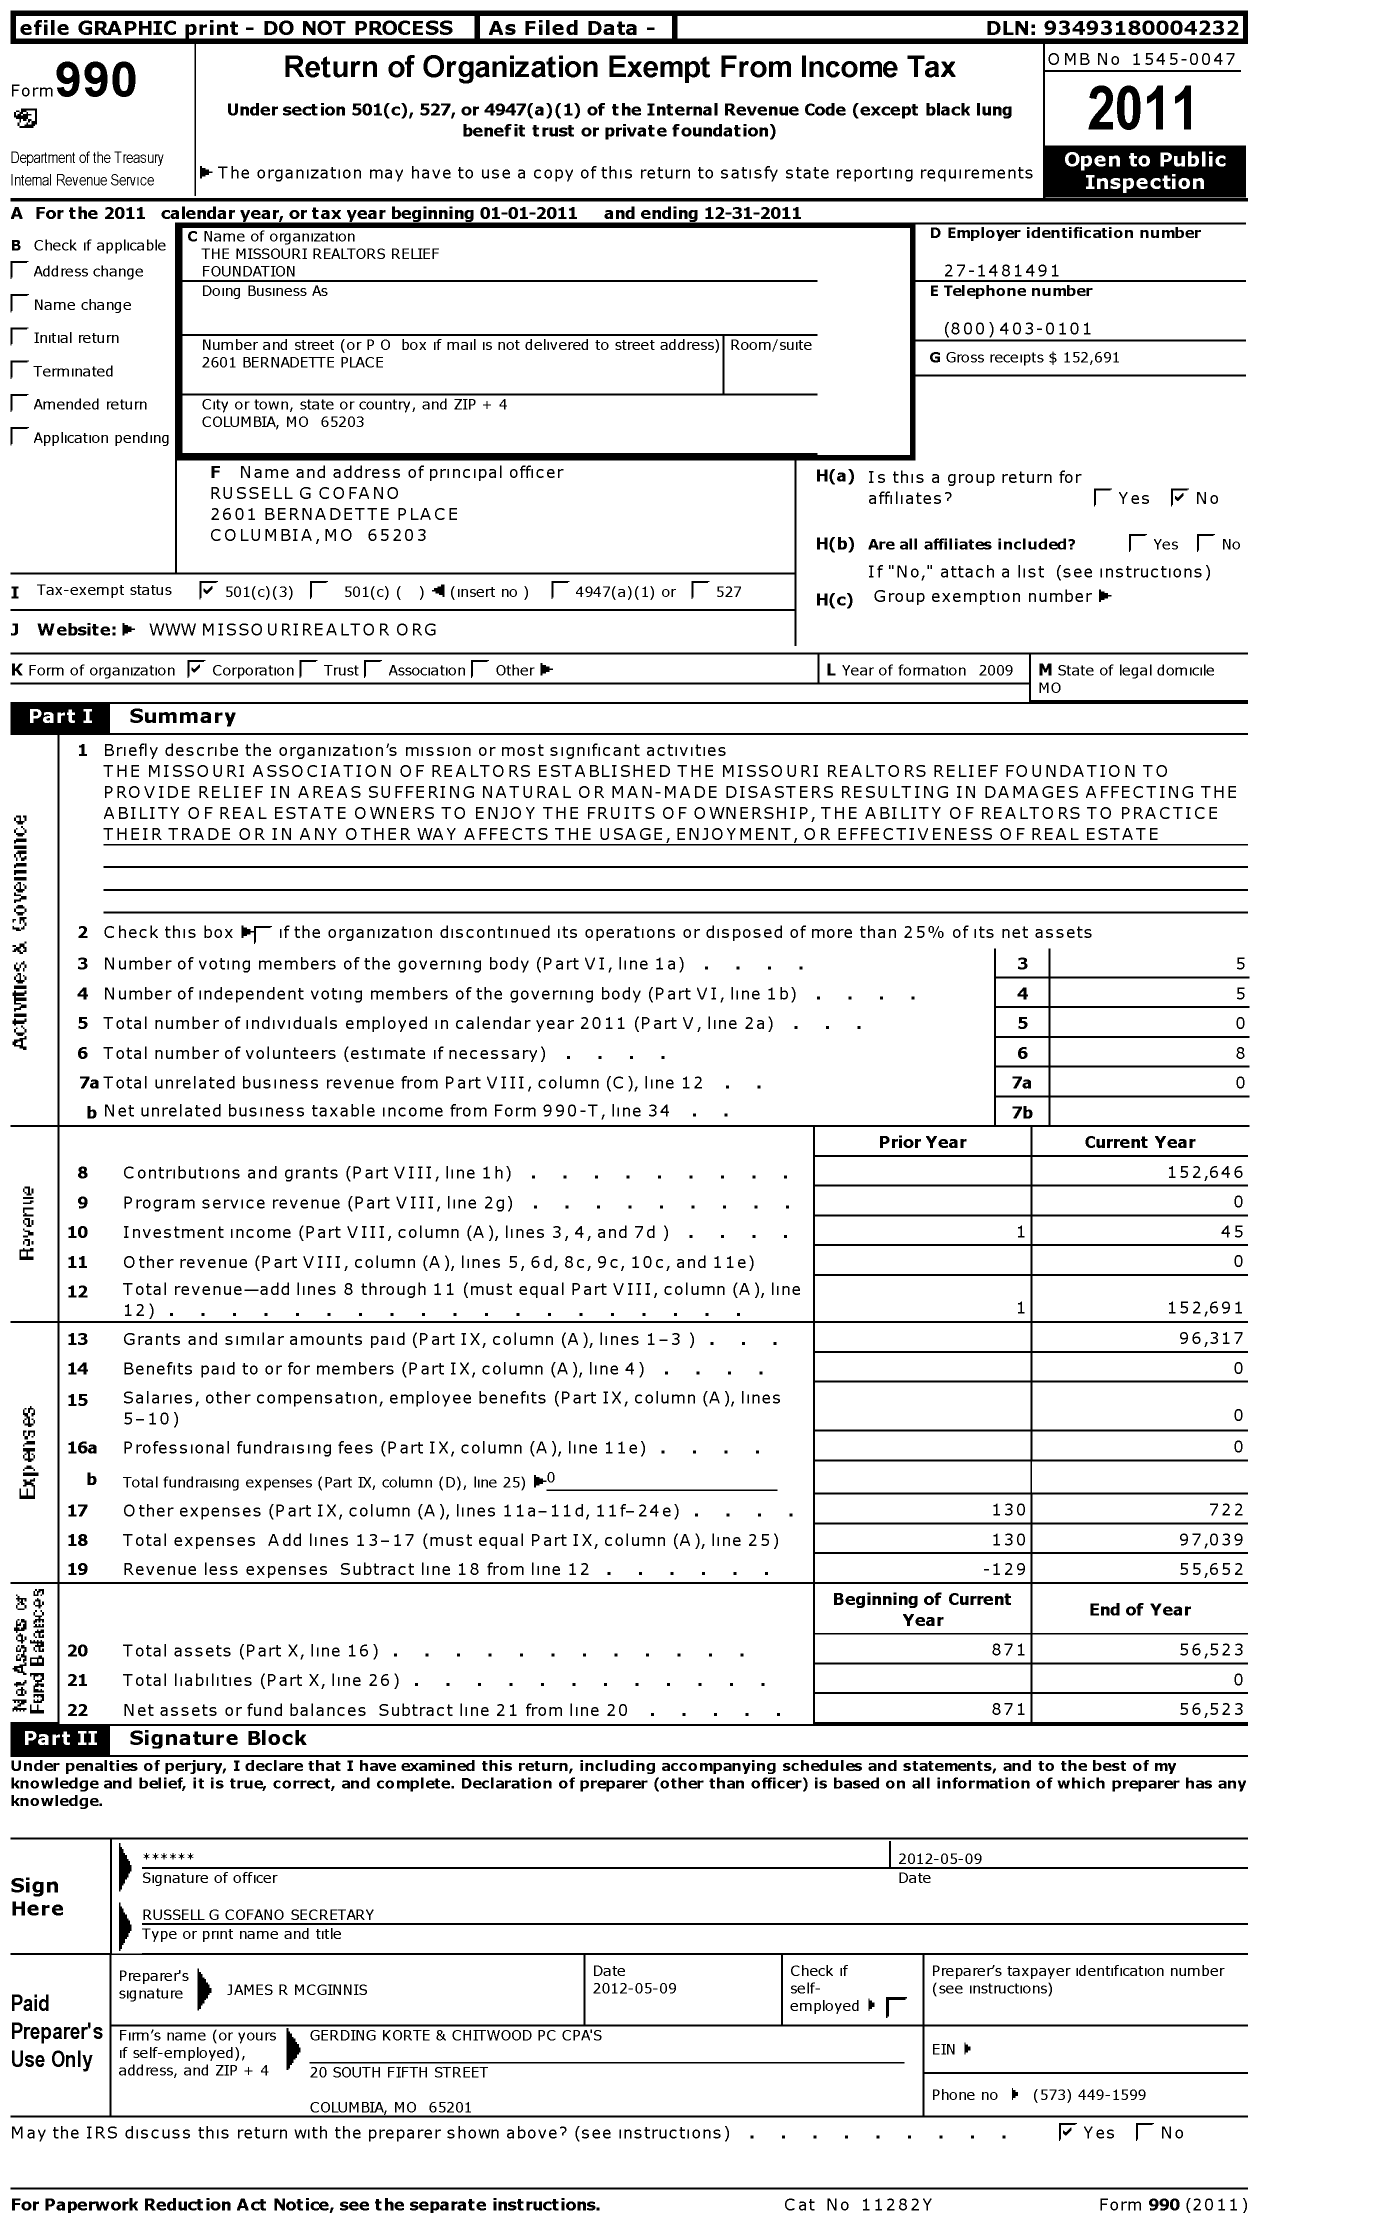 Image of first page of 2011 Form 990 for Missouri Realtors Relief Foundation